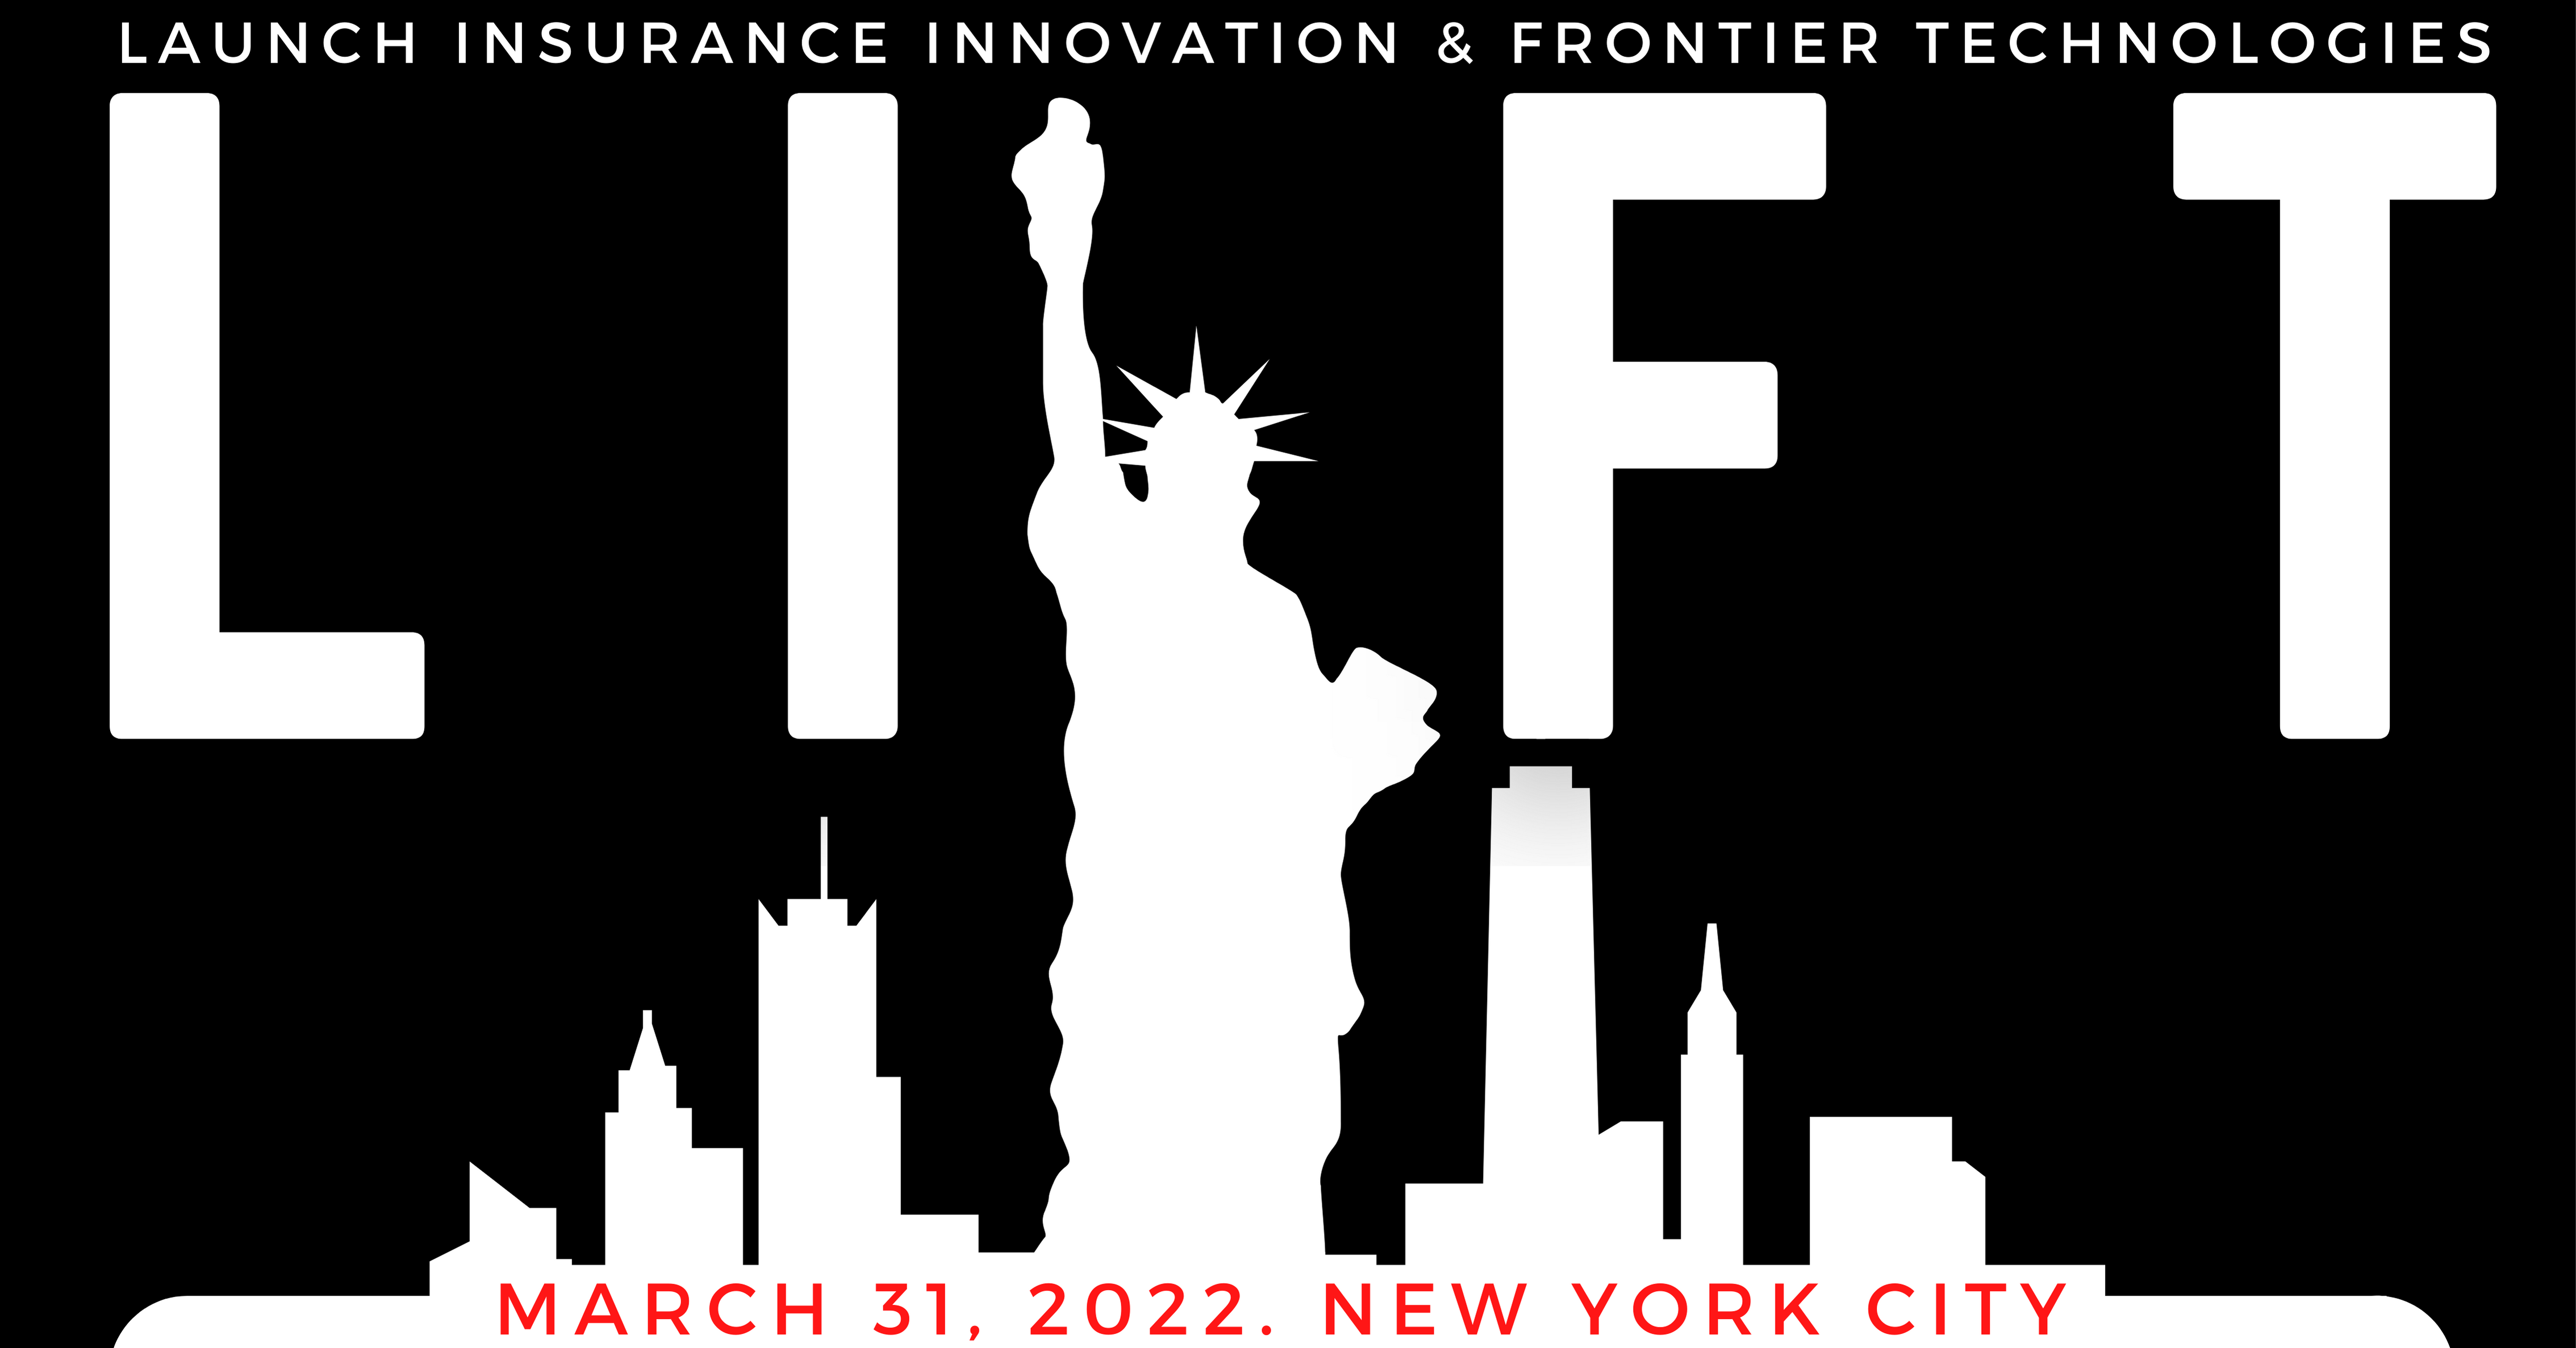 LIIFT 2022 (Launch Insurance Innovation & Frontier Technologies) organized by The Lighthouse Collective